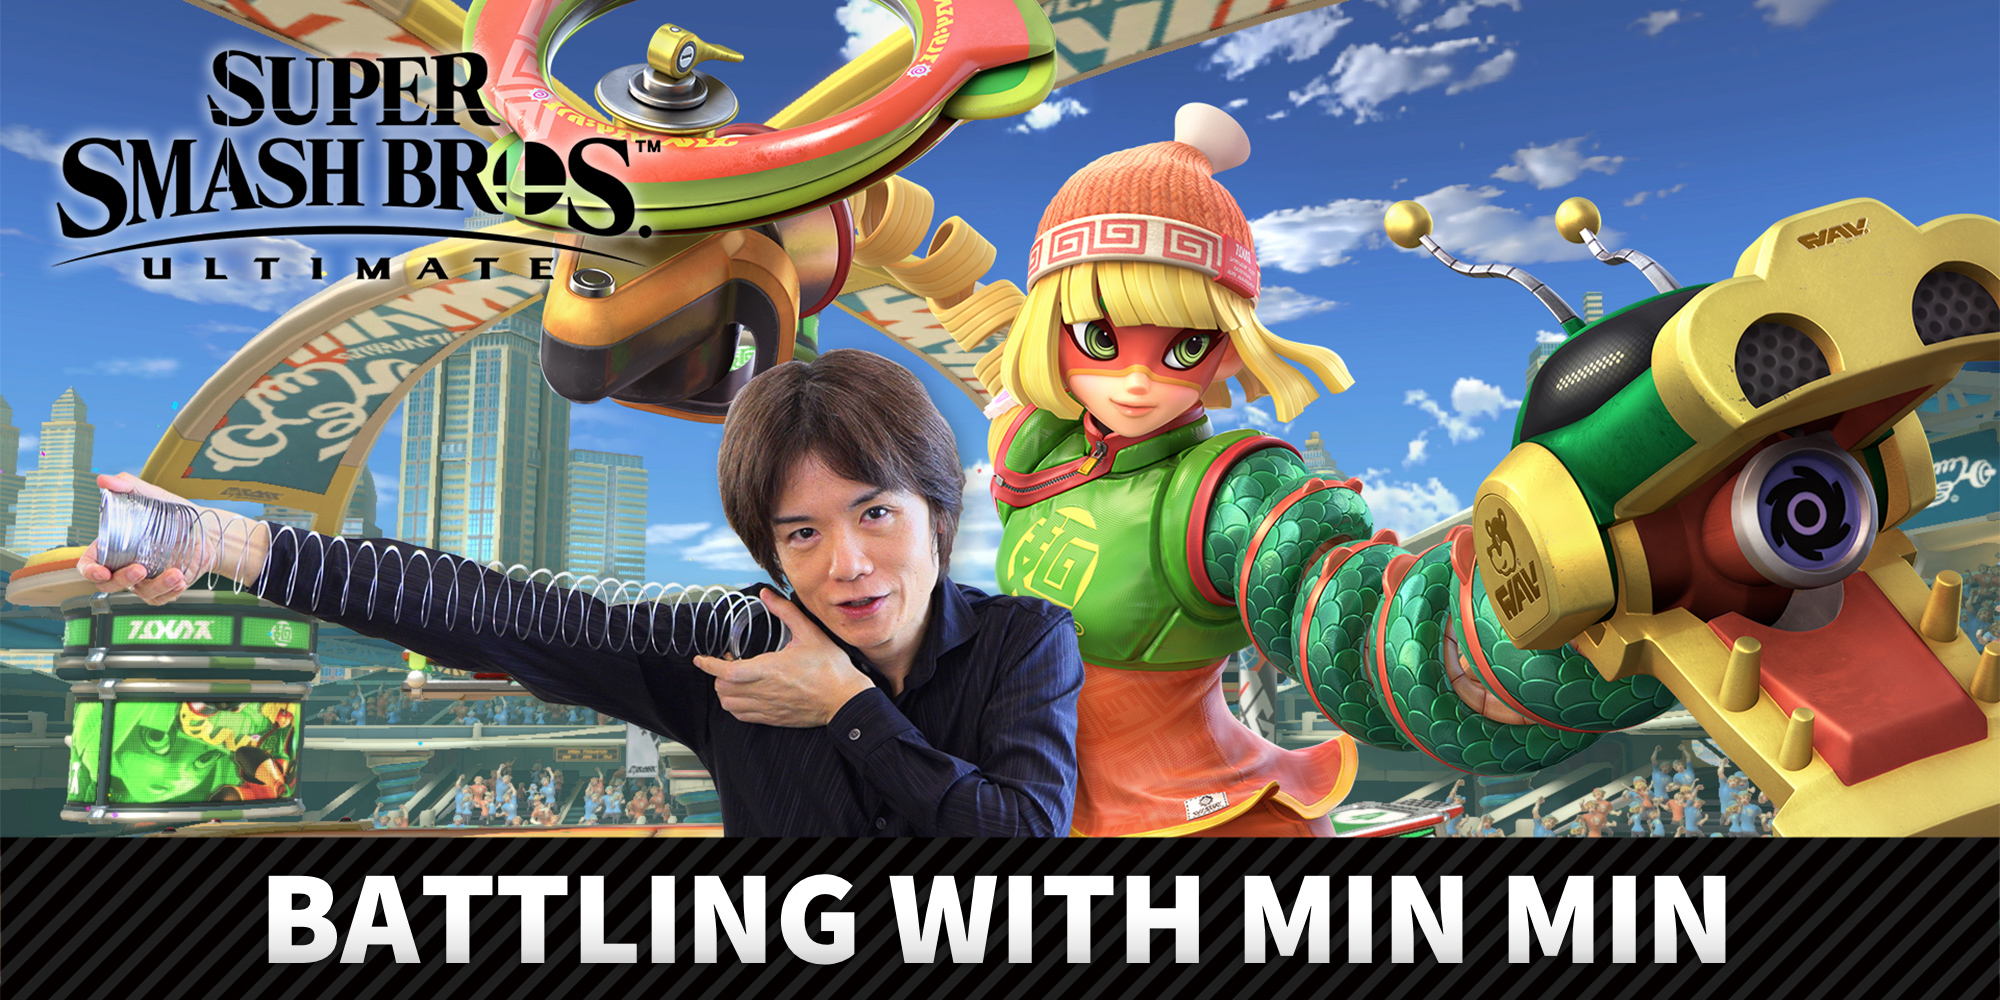 Min Min from ARMS joins Super Smash Bros. Ultimate on June 30th!